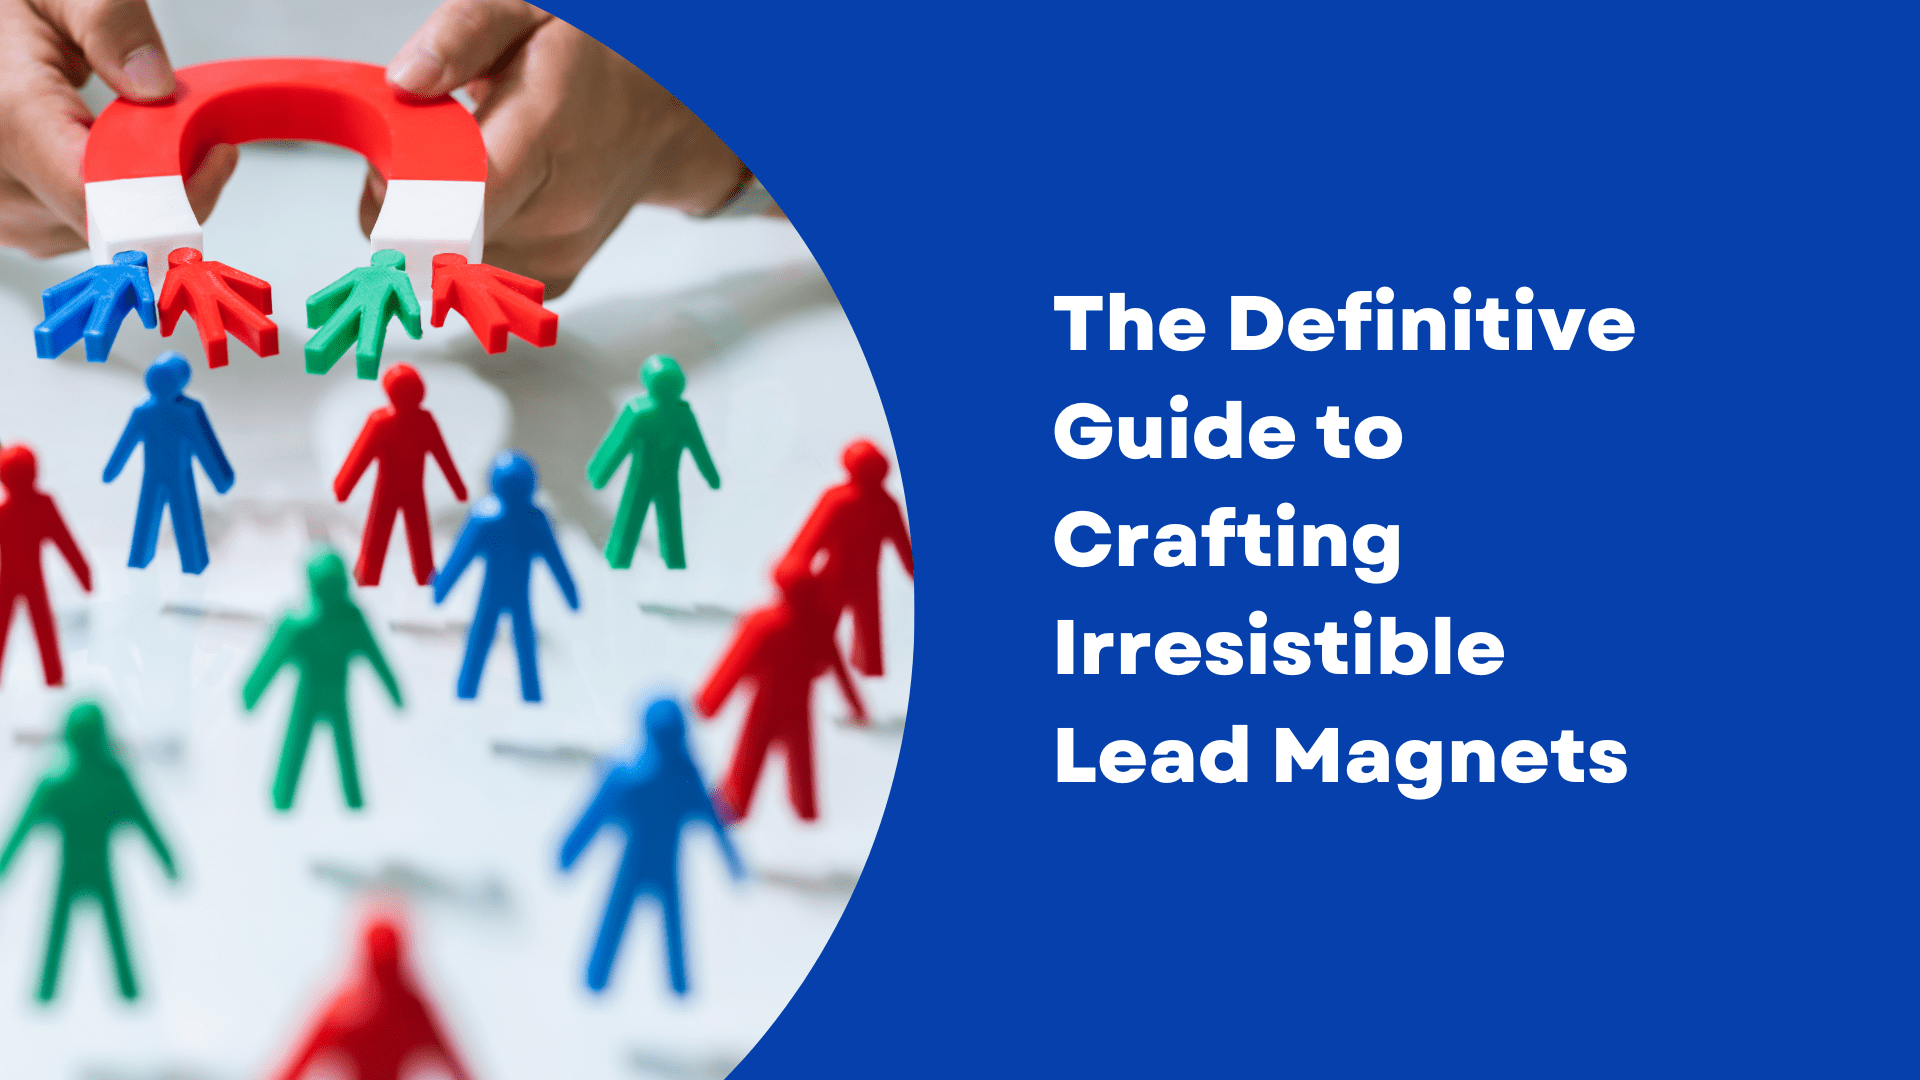 The Definitive Guide to Crafting Irresistible Lead Magnets